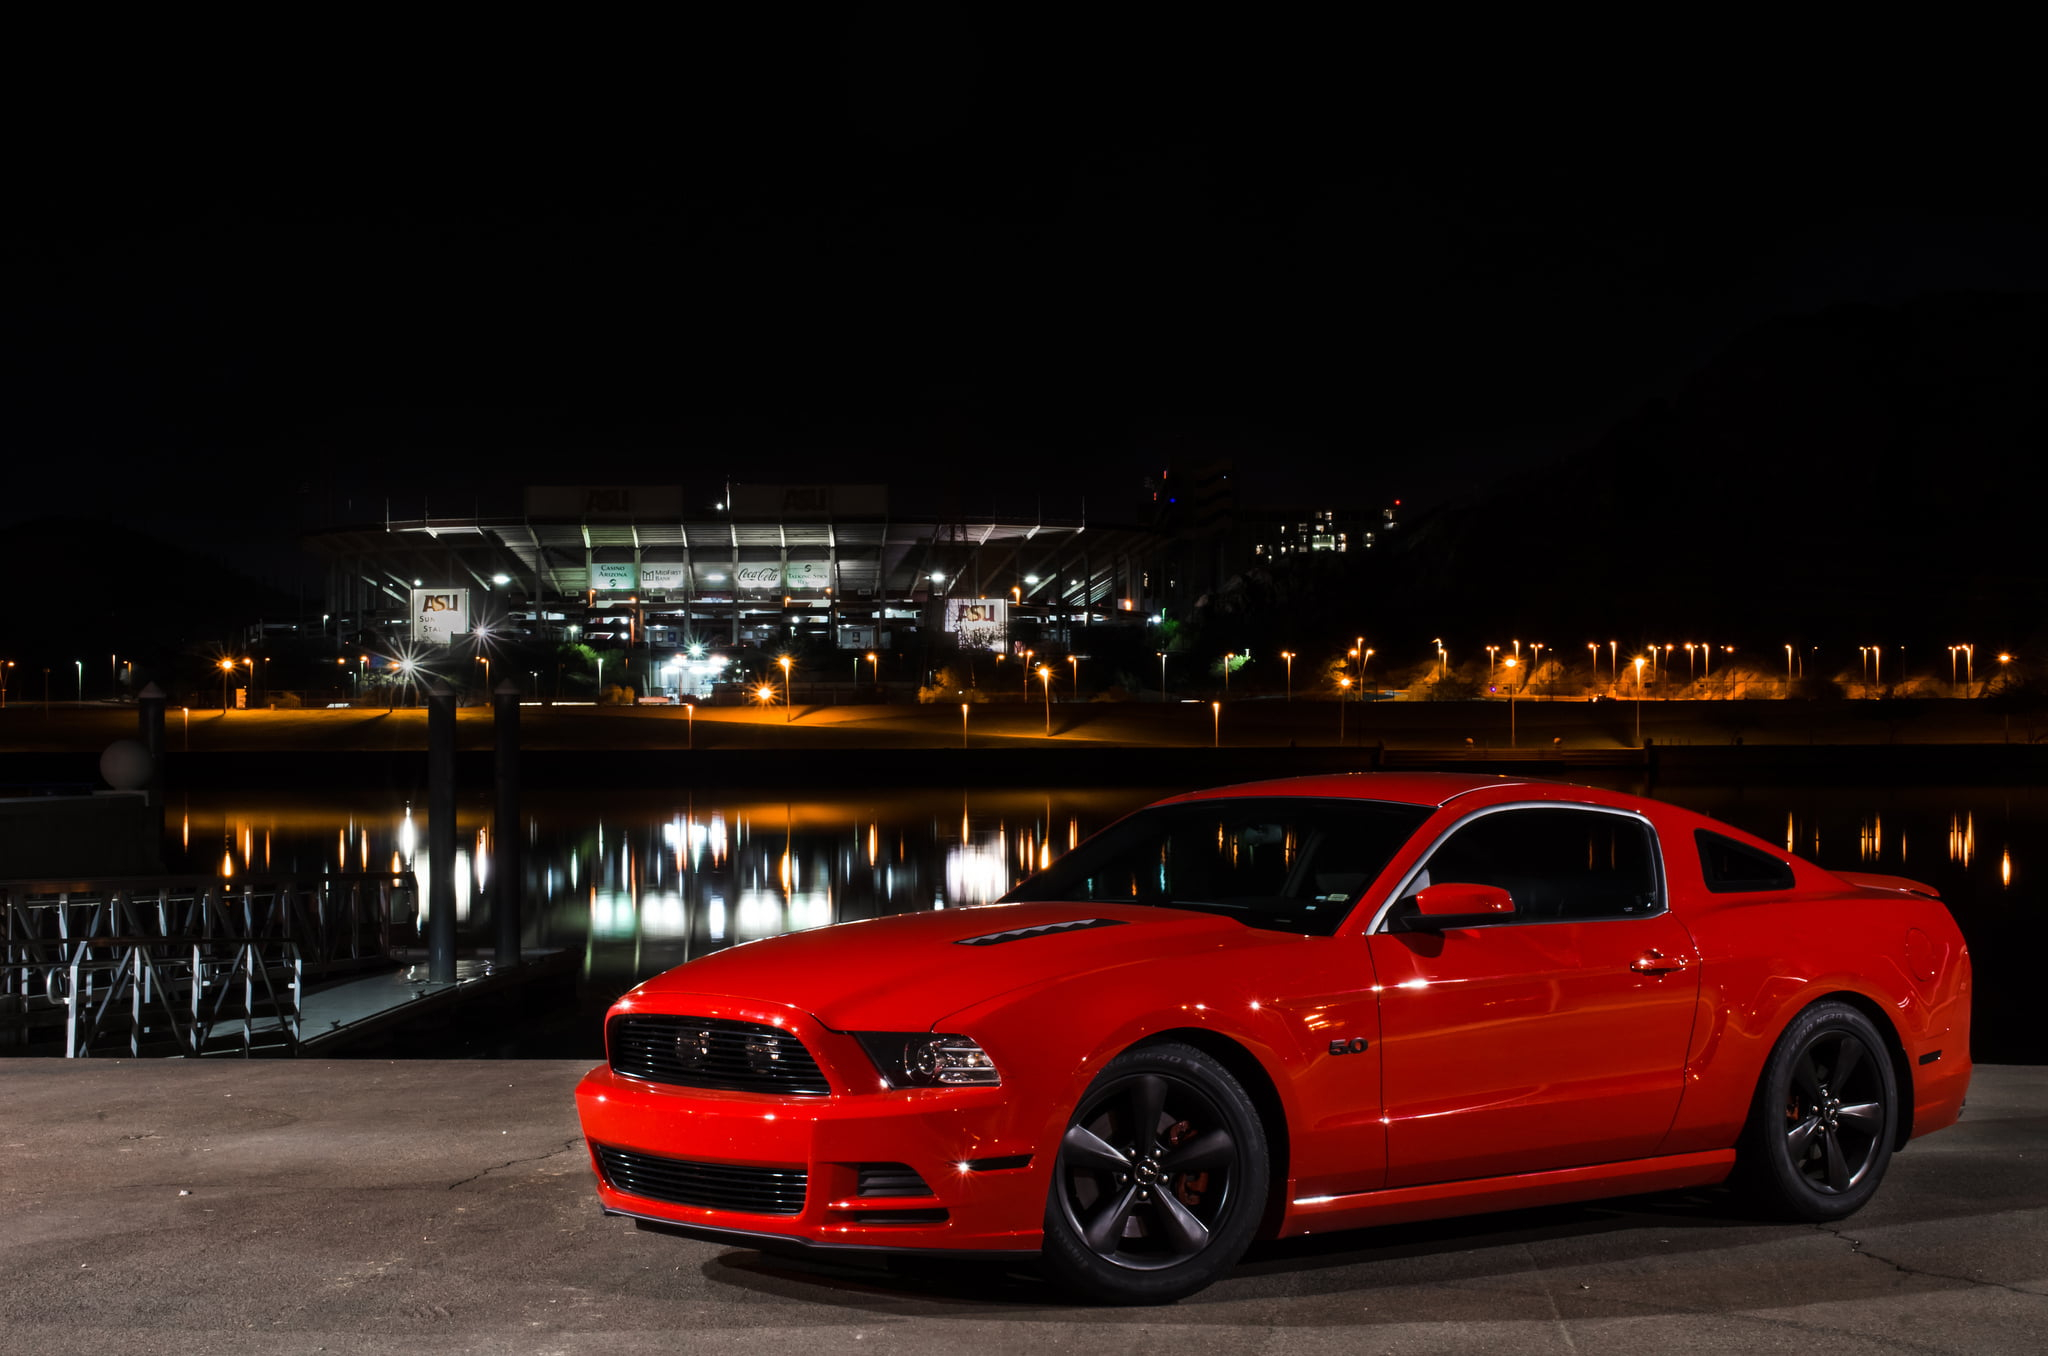 2048x1356 Red Ford Mustang parked near bay during night time HD wallpaper | Wallpaper Flare